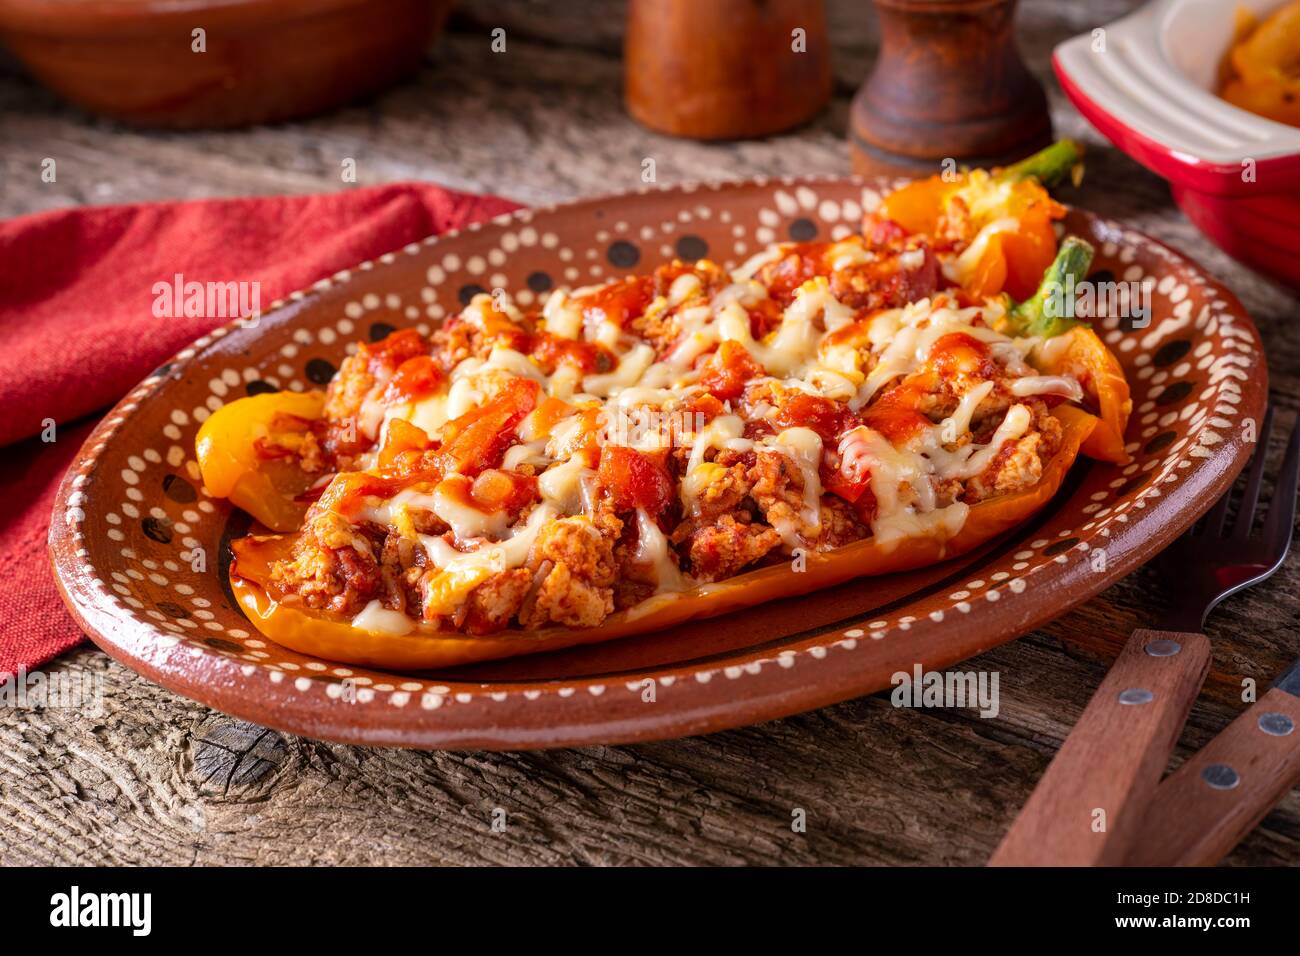 A plate of delicious mexican style stuffed peppers with ground meat, tomato sauce and melted cheese. Stock Photo